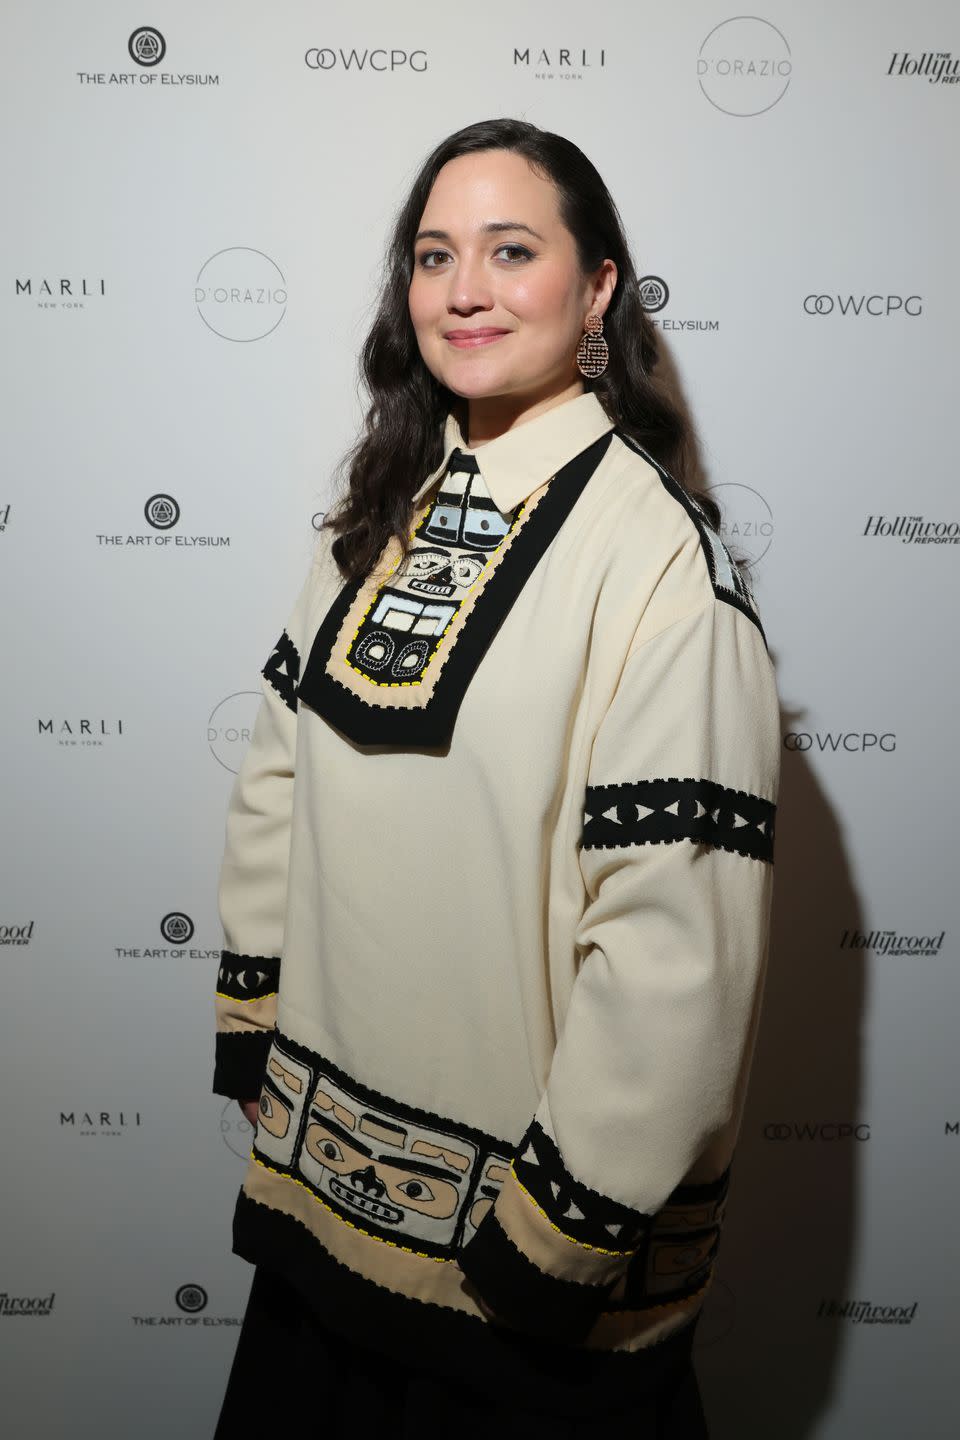 lily gladstone poses on the red carpet wearing a cream, collared jumper with embroidered motifs